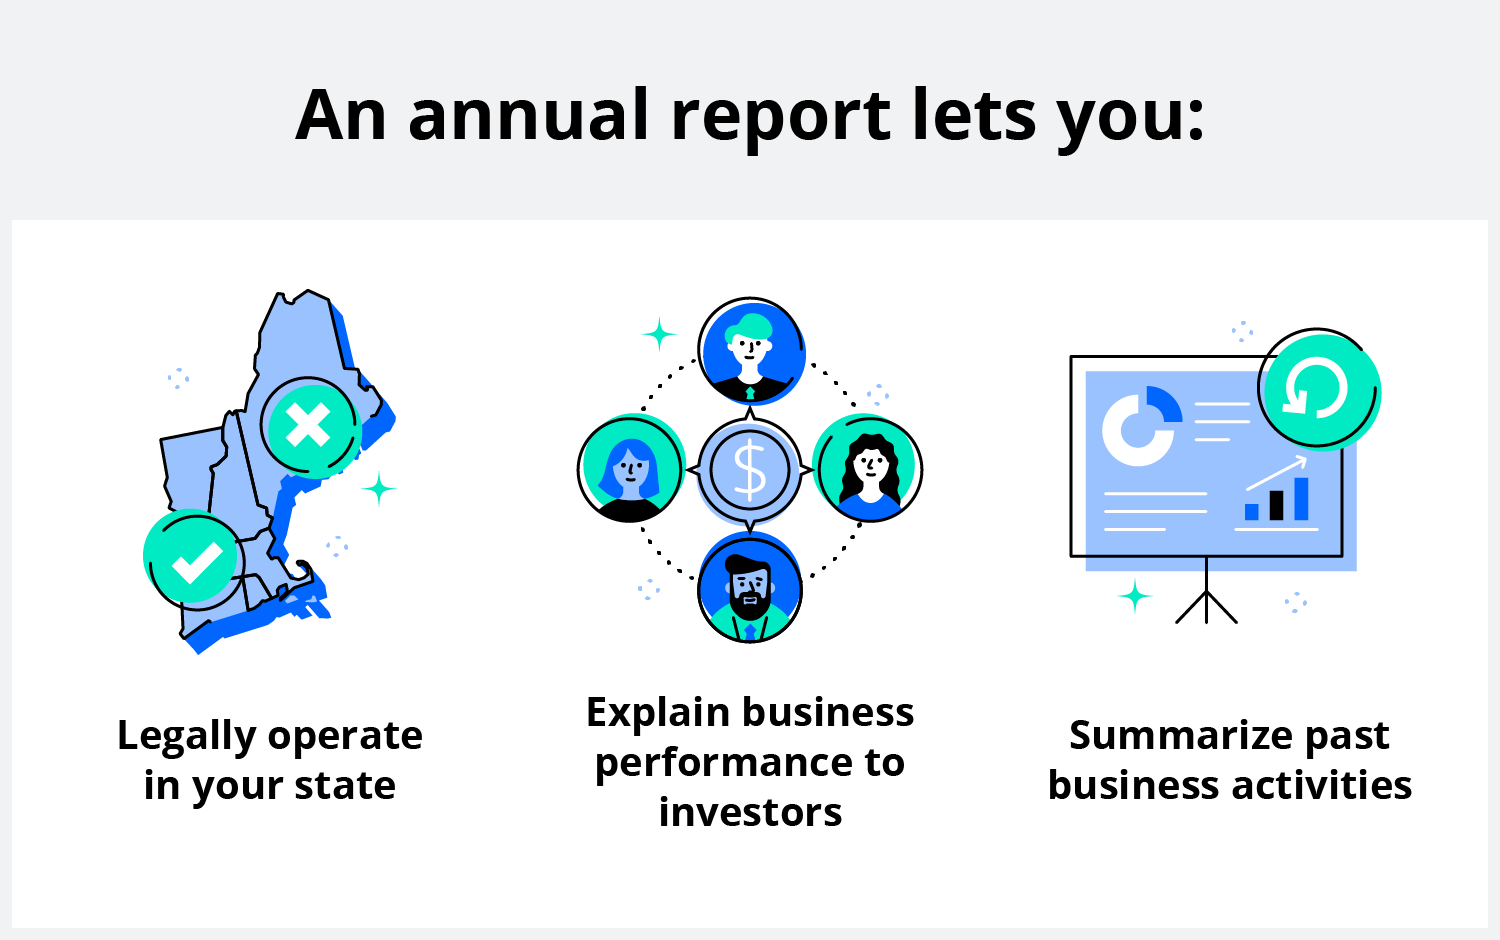 The purpose of an annual report is to provide data on business operations for investors and outside analysts. 